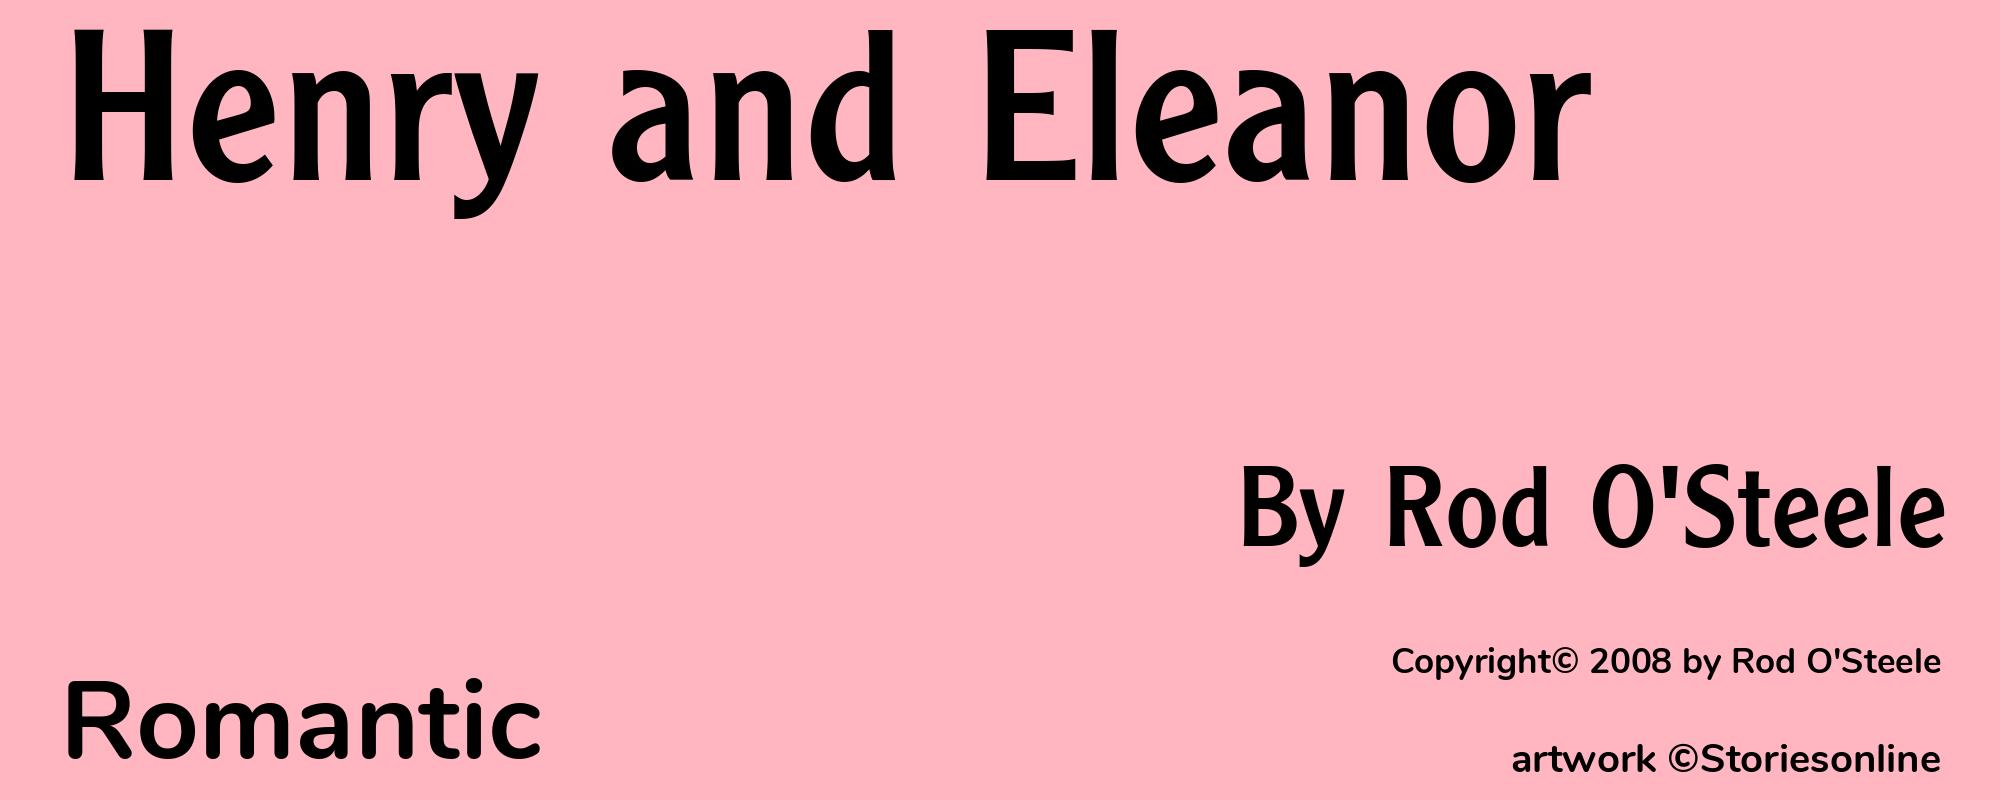 Henry and Eleanor - Cover